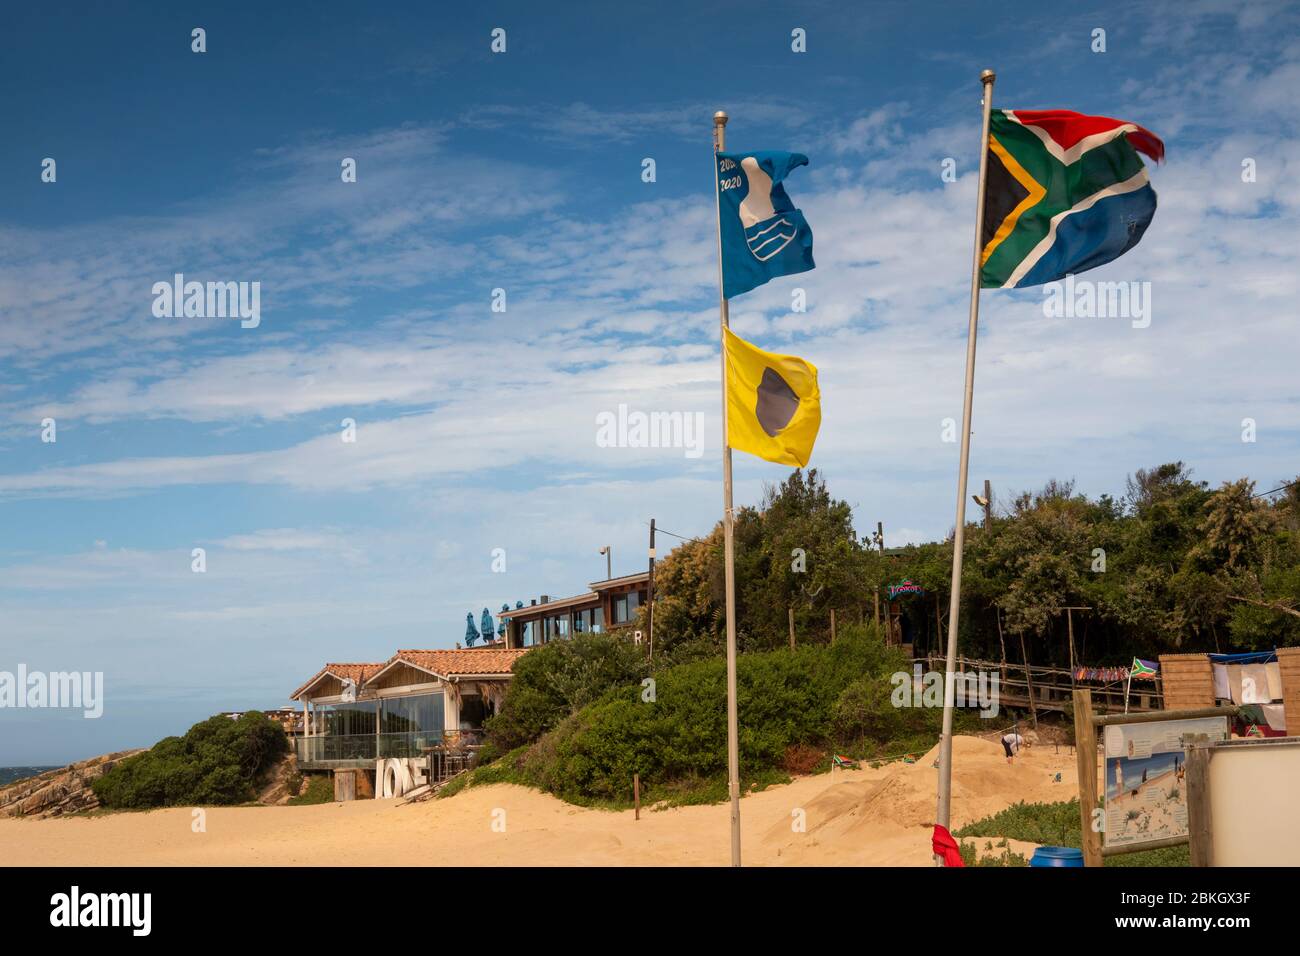 South Africa, Western Cape, Plettenberg Bay, Hill Street, blue flag flying at Lookout Beach with yellow and black lifeguard flag and national flag Stock Photo